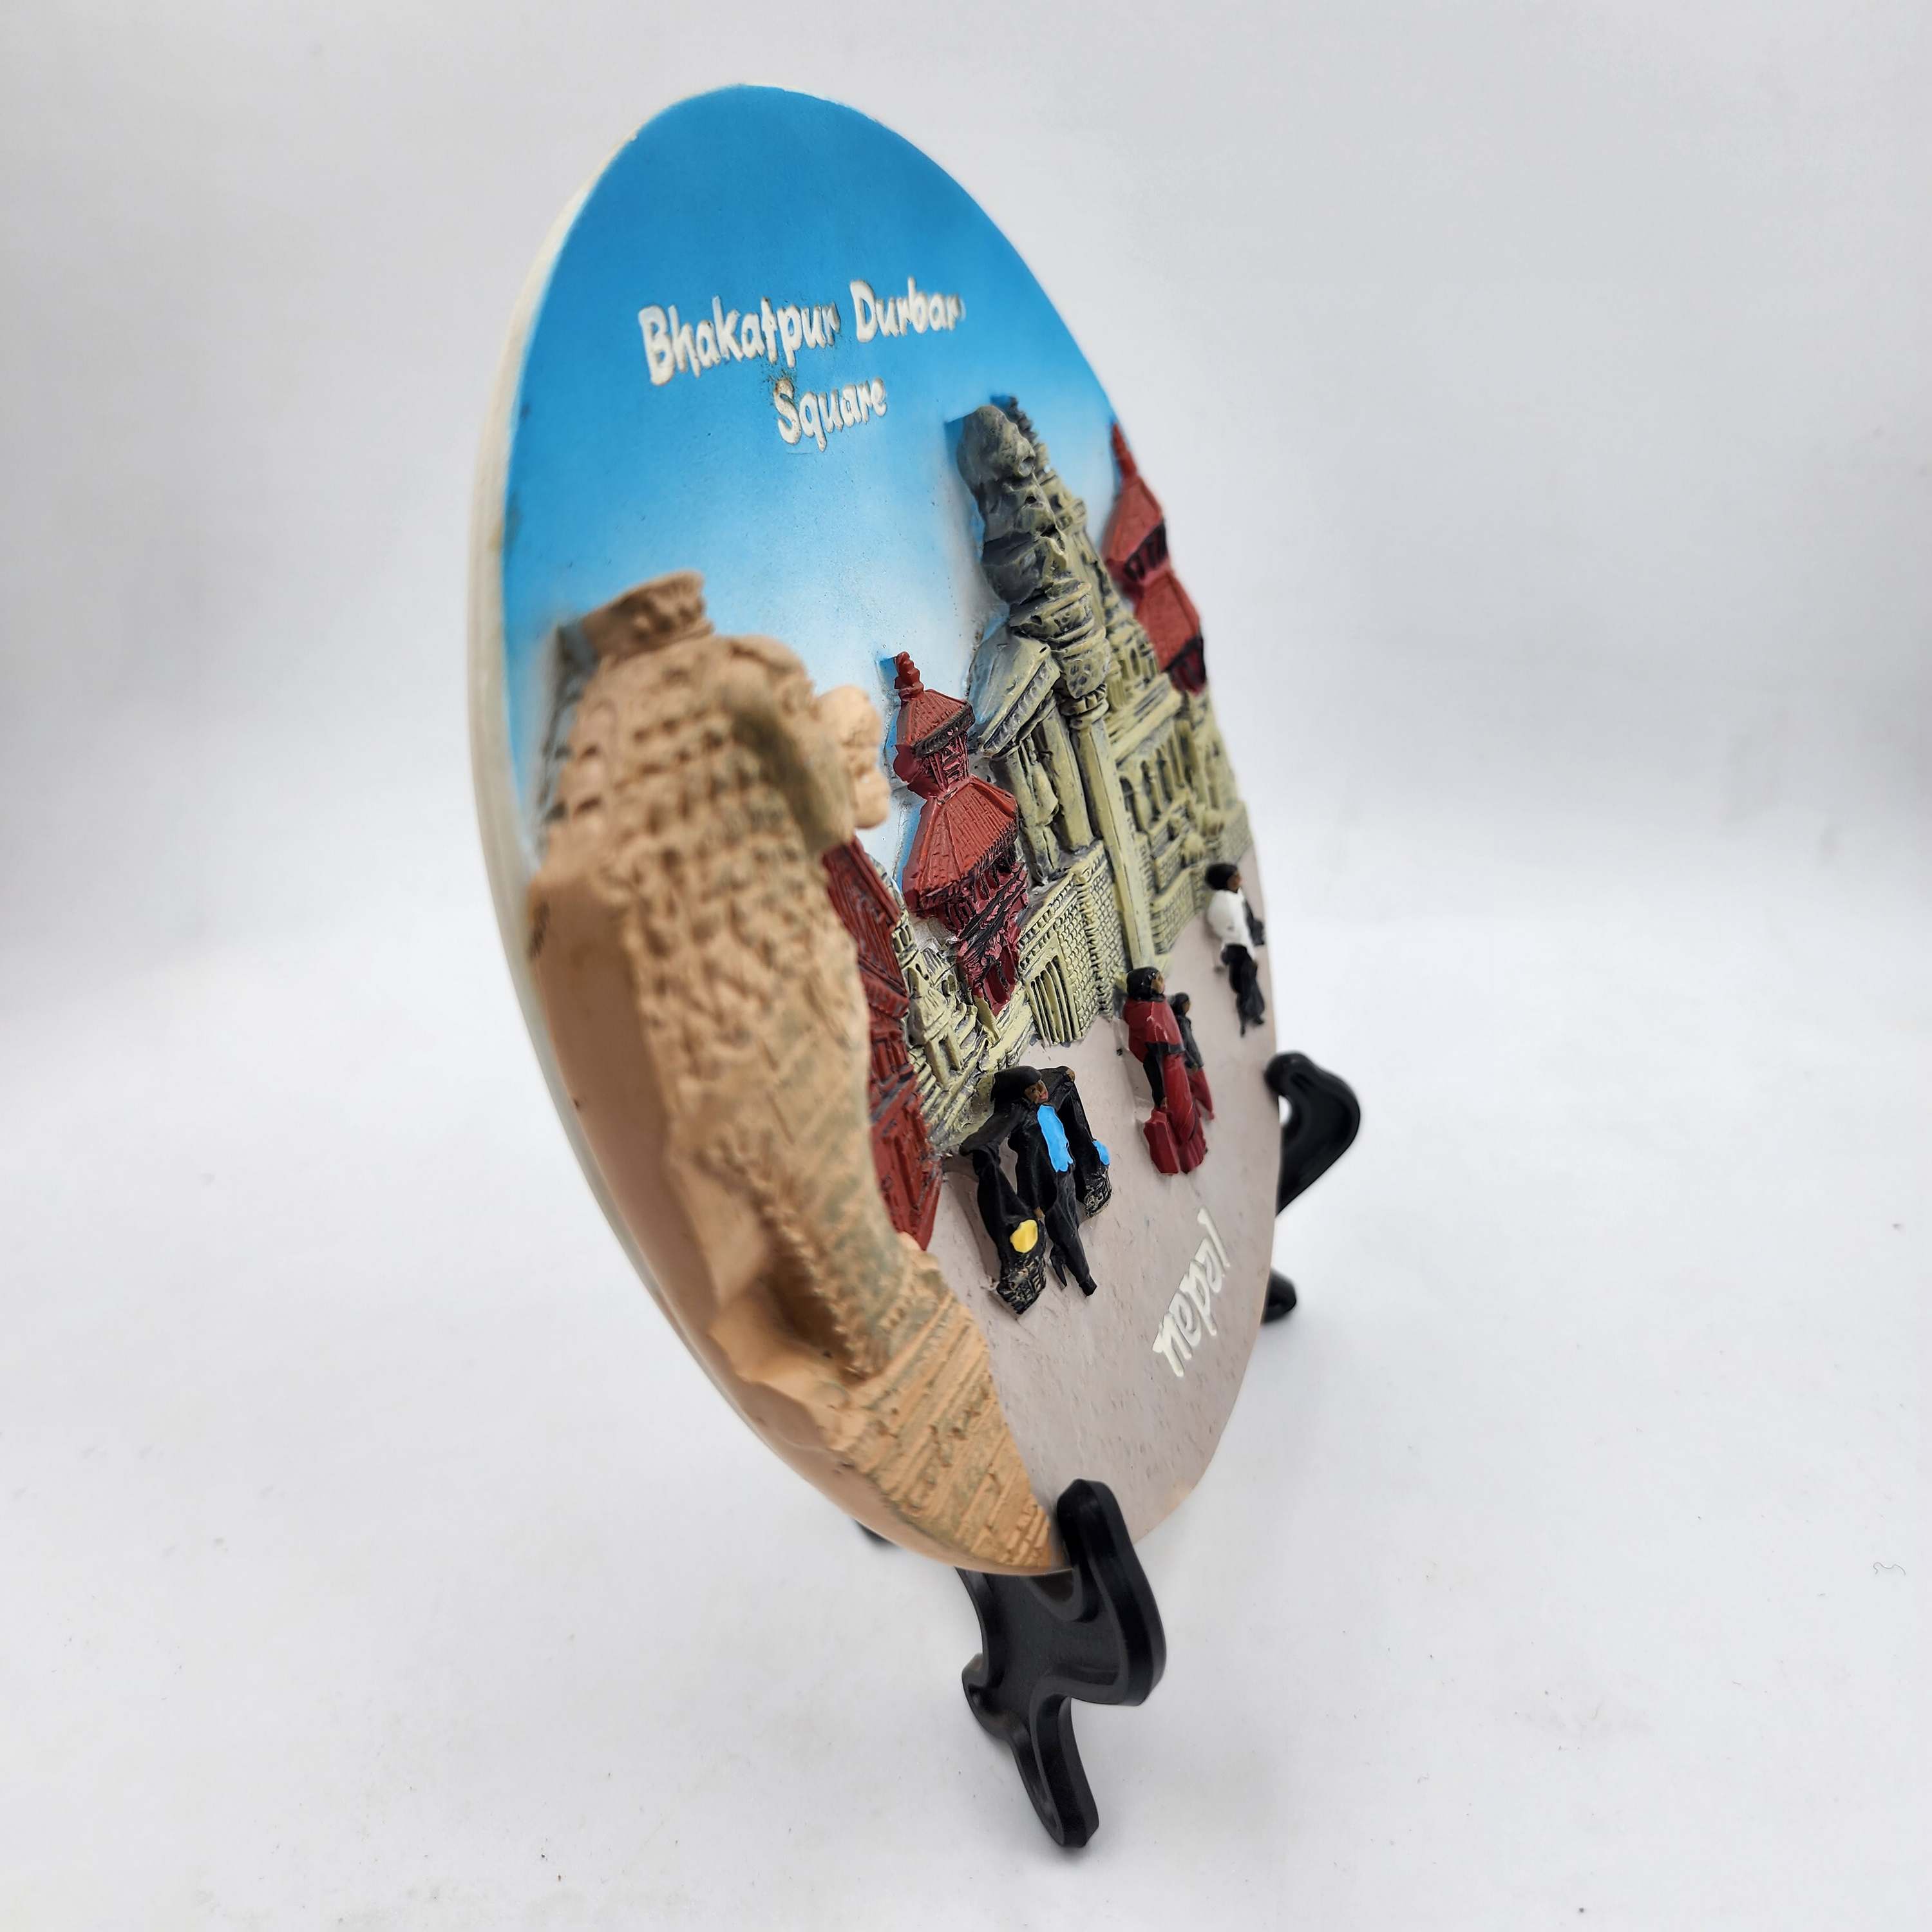 3d Fiber Art Of Bhaktapur Durbar Square Of Nepal With Stand And Wall Hanger, Ceramic Plate, Souvenir